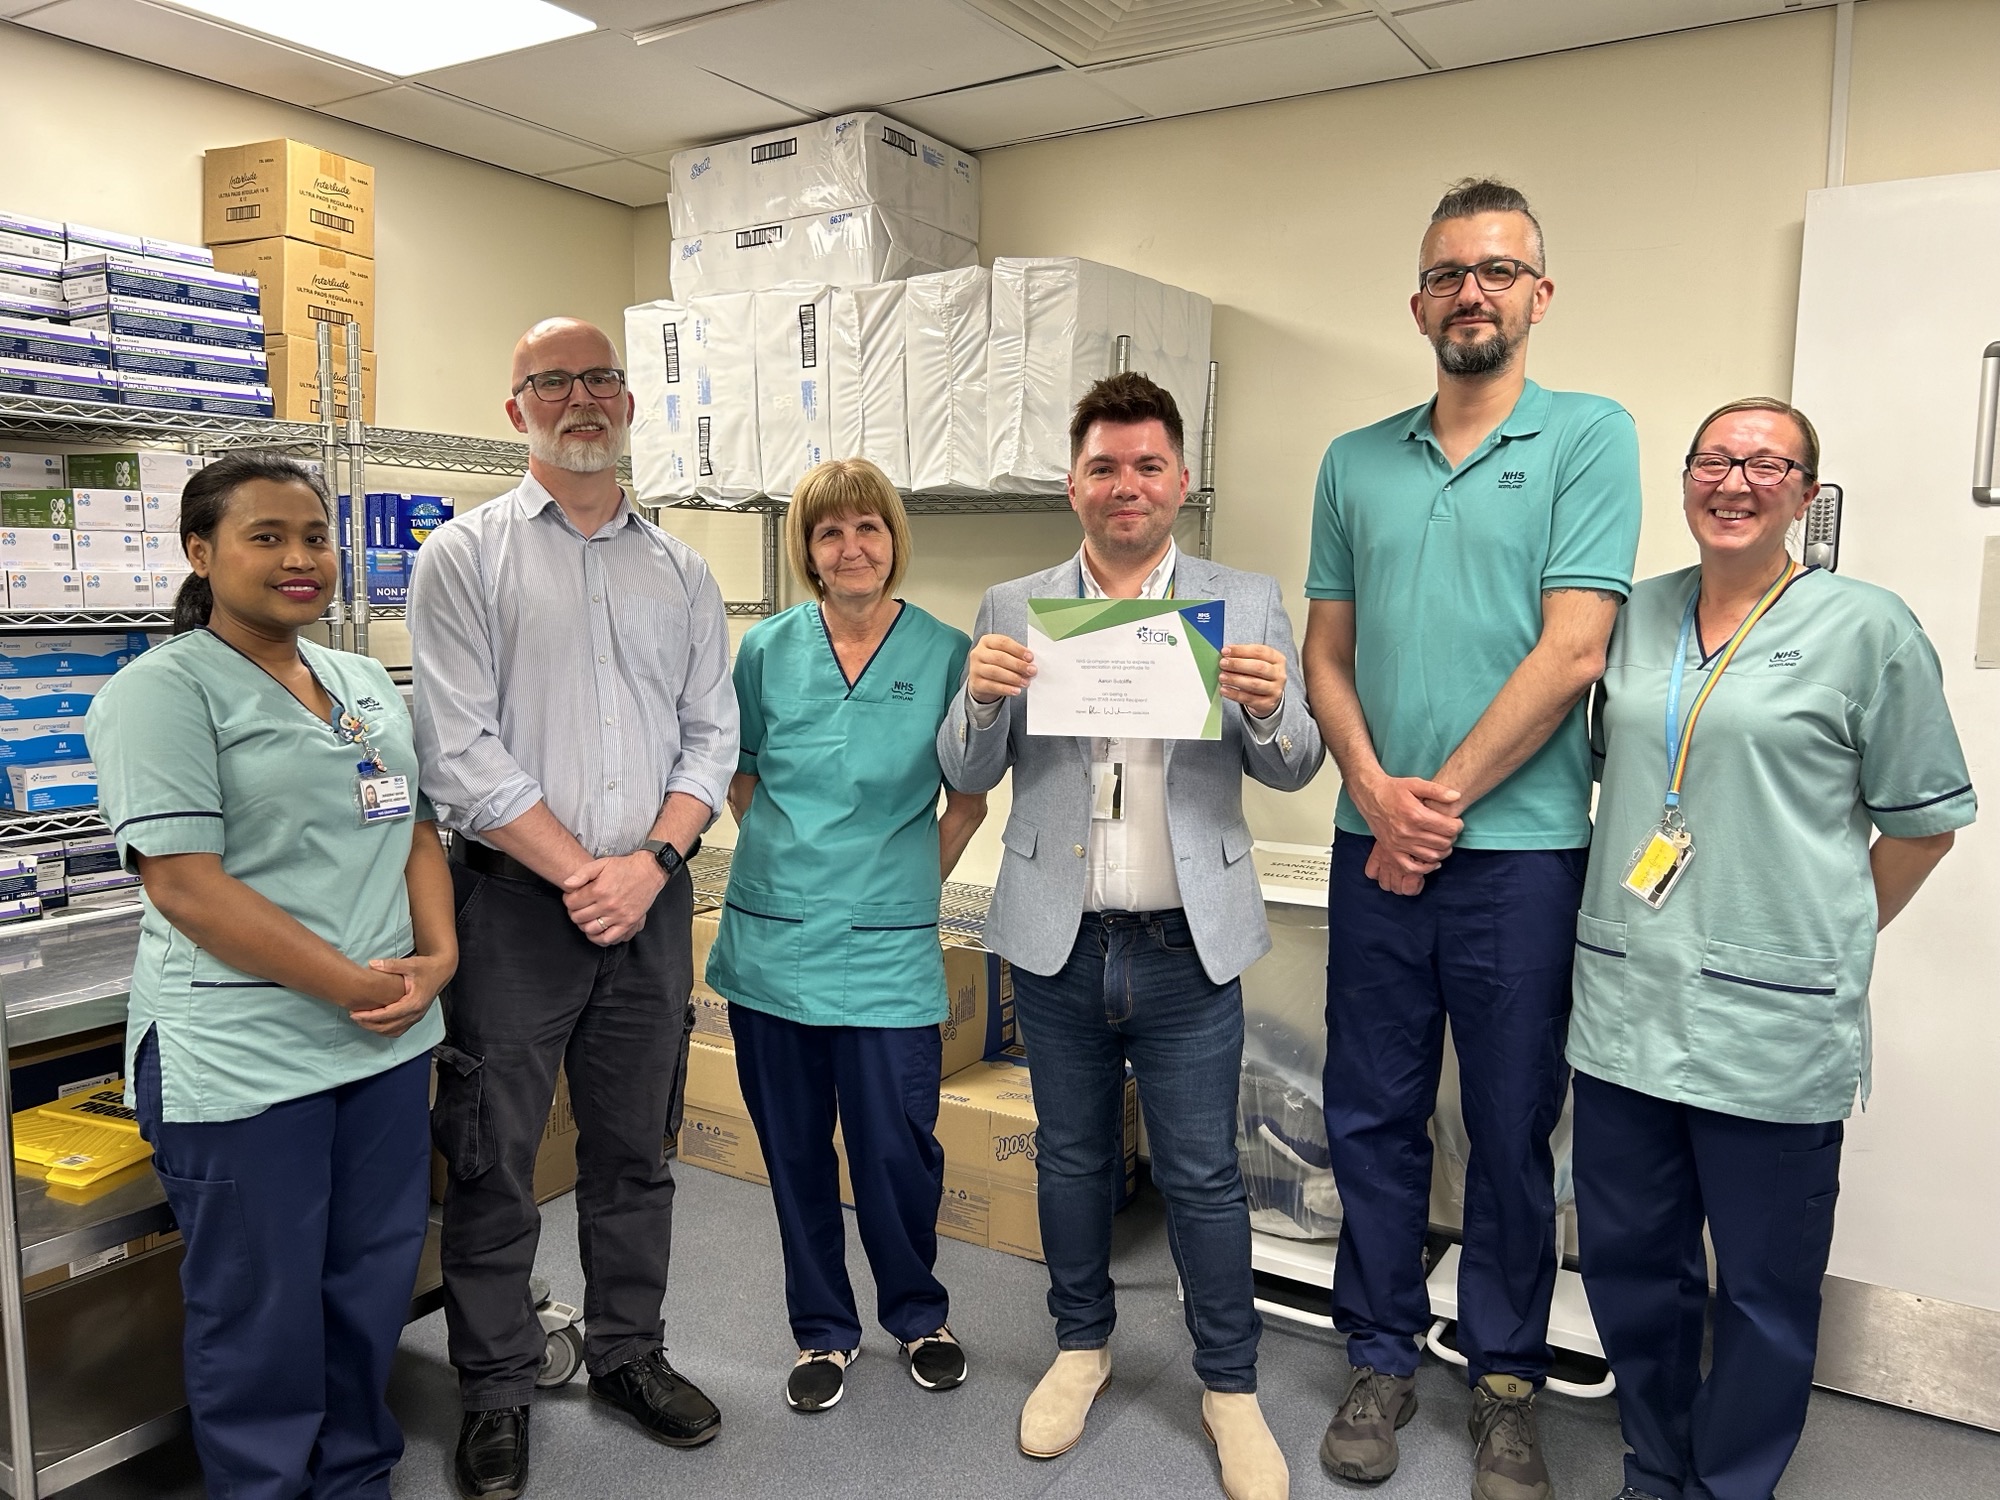 Aaron Sutcliffe and his team alongside Neil Duncan at Aberdeen Royal Infirmary